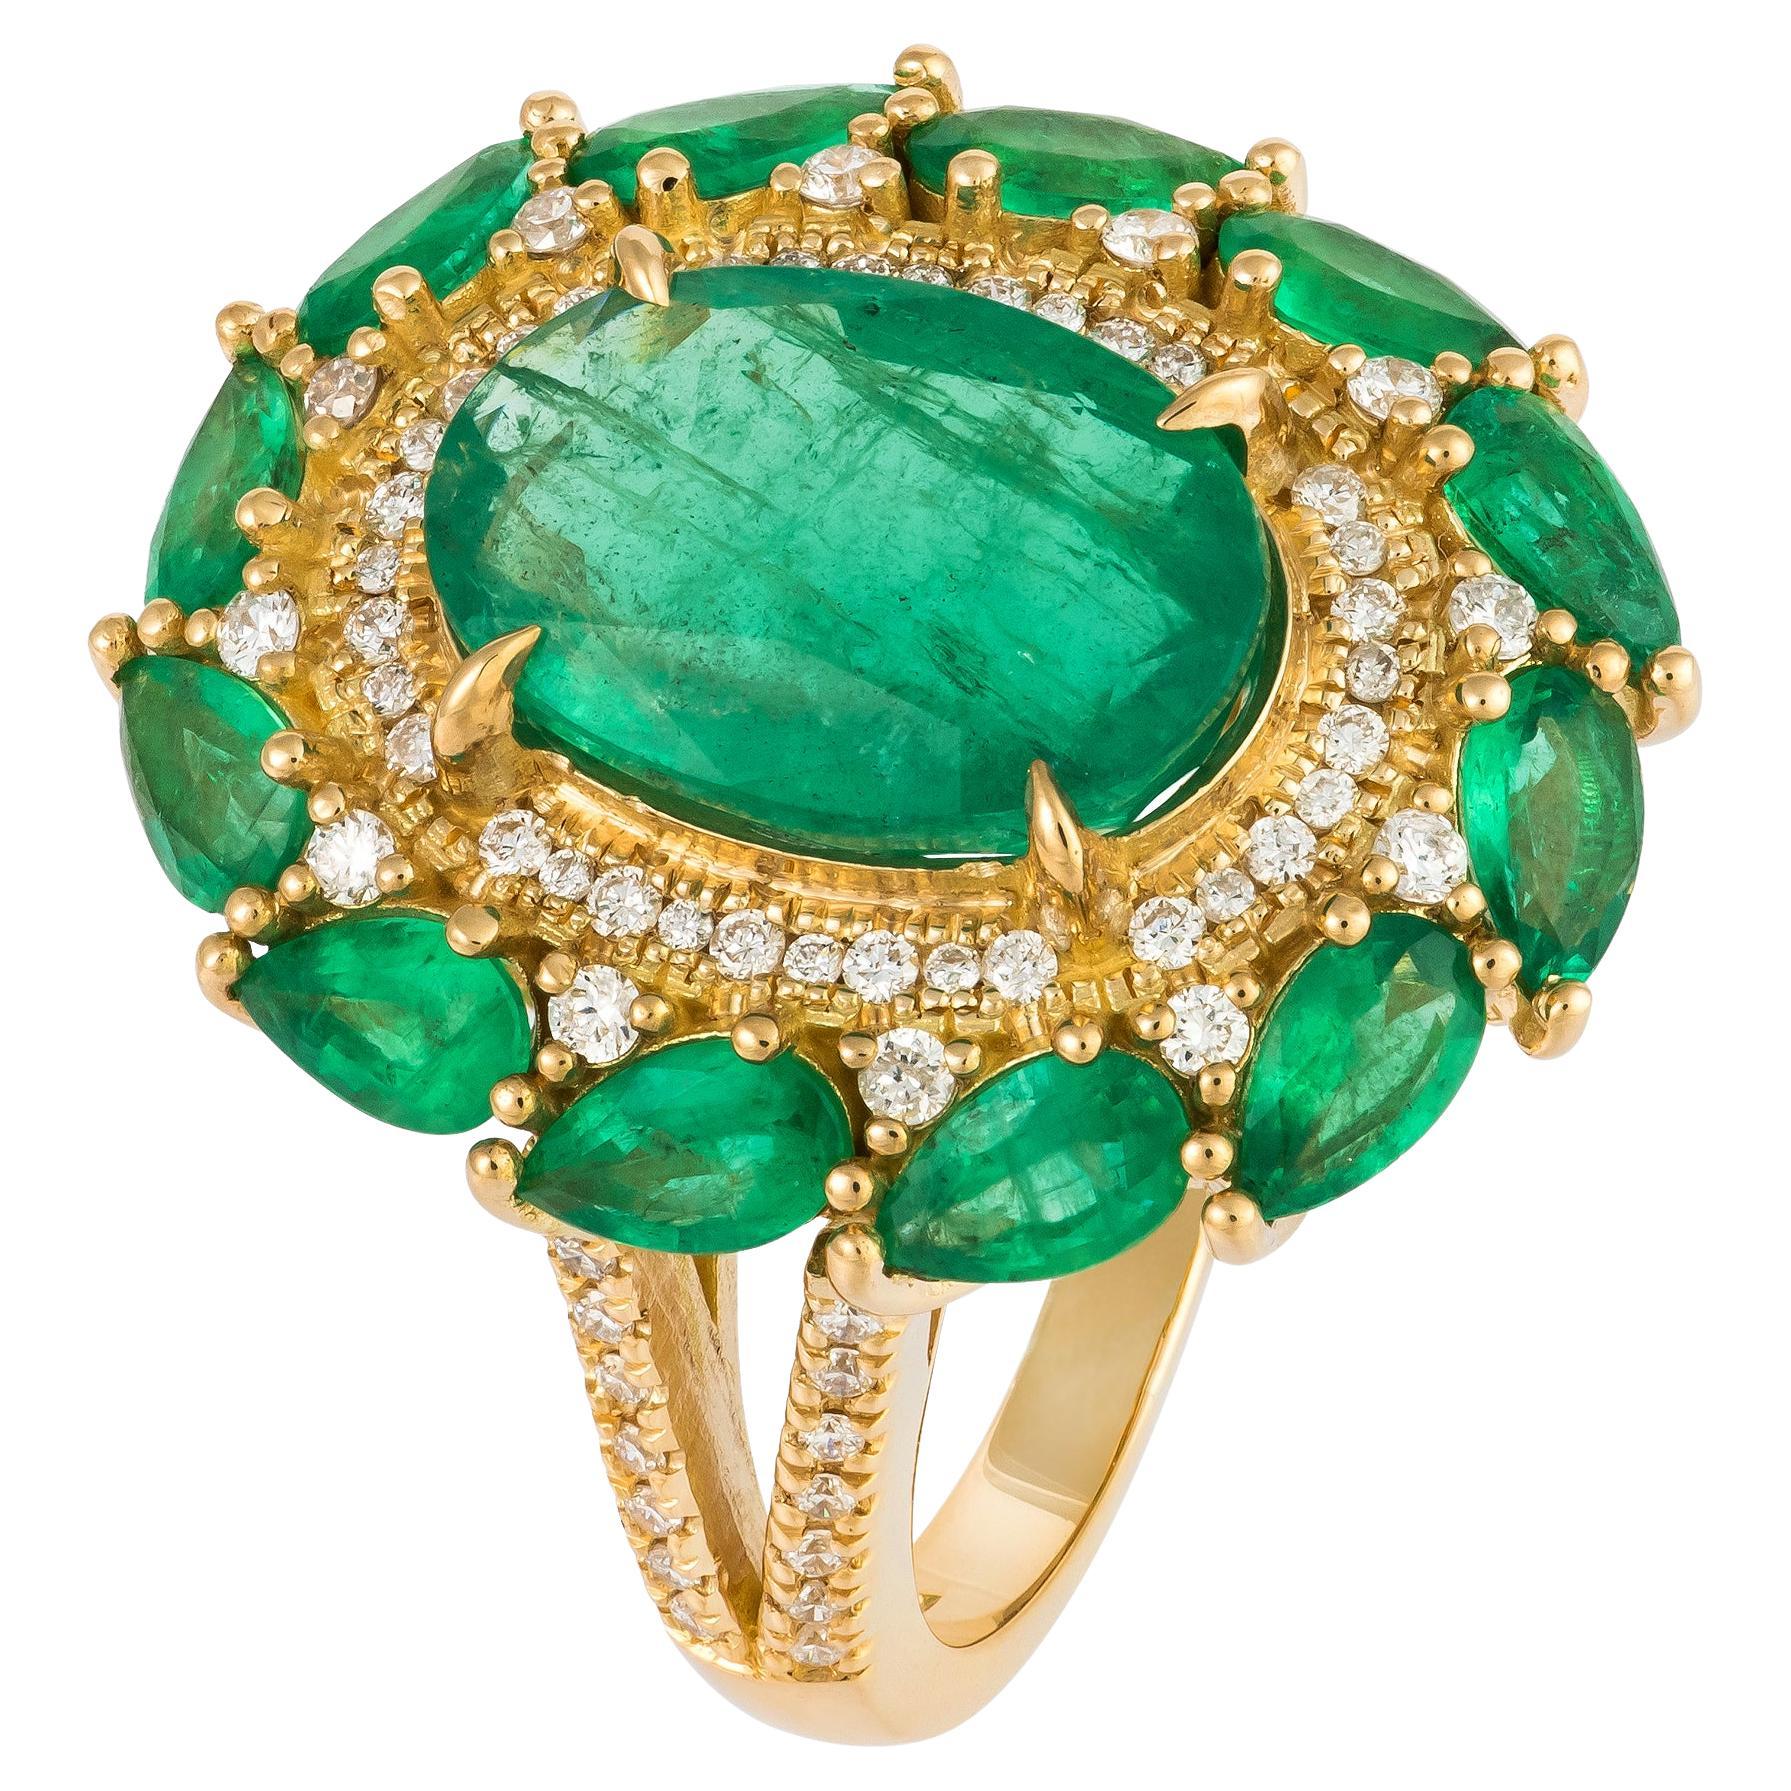 For Sale:  Impressive Yellow 18K Gold Emerald White Diamond Ring For Her